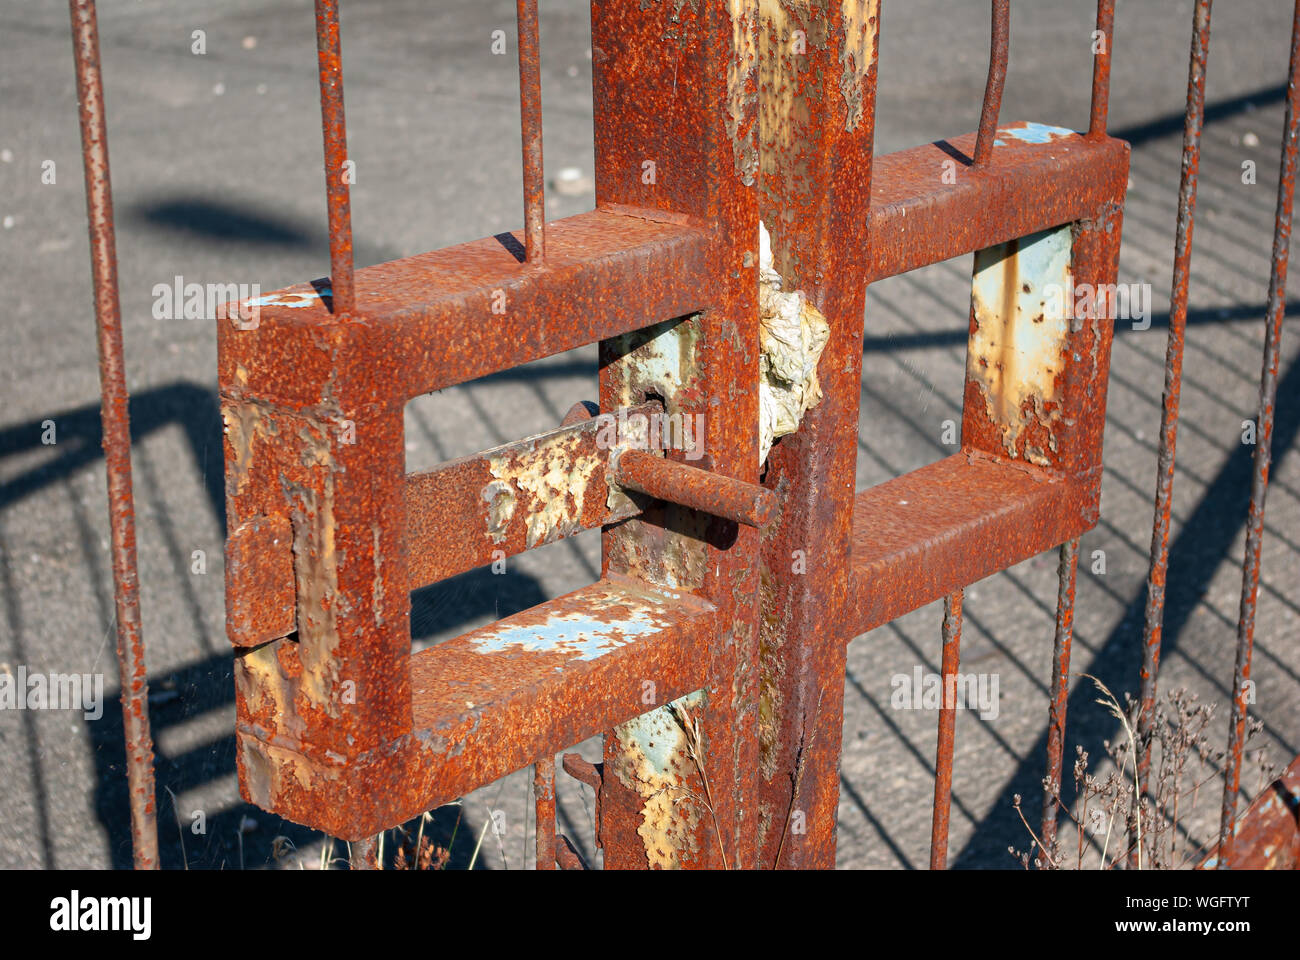 Close-up of rusty metal gate latch on a set of industrial gates Stock Photo